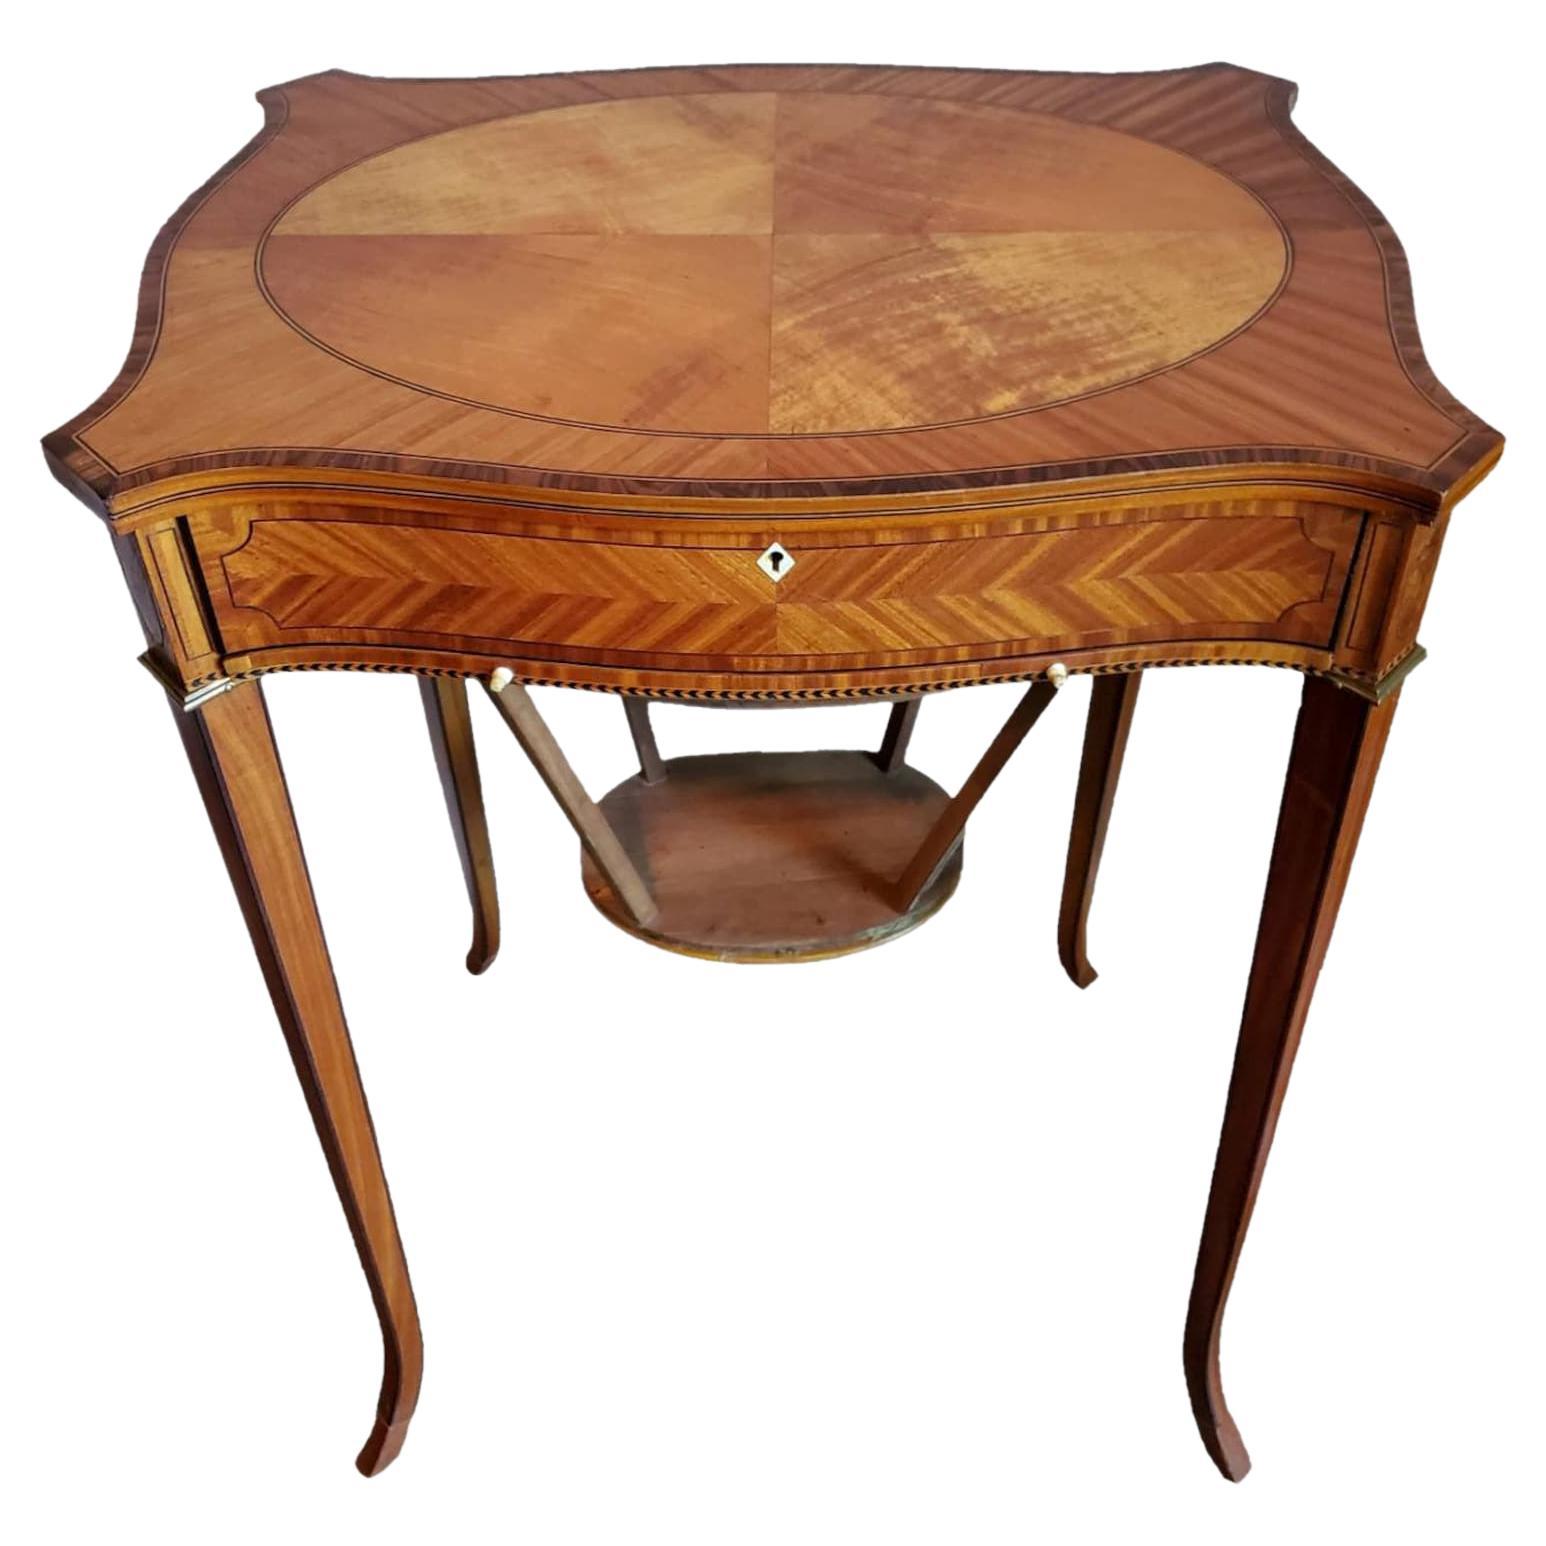 Antique English Edwardian Marquetry Inlaid Sewing Table